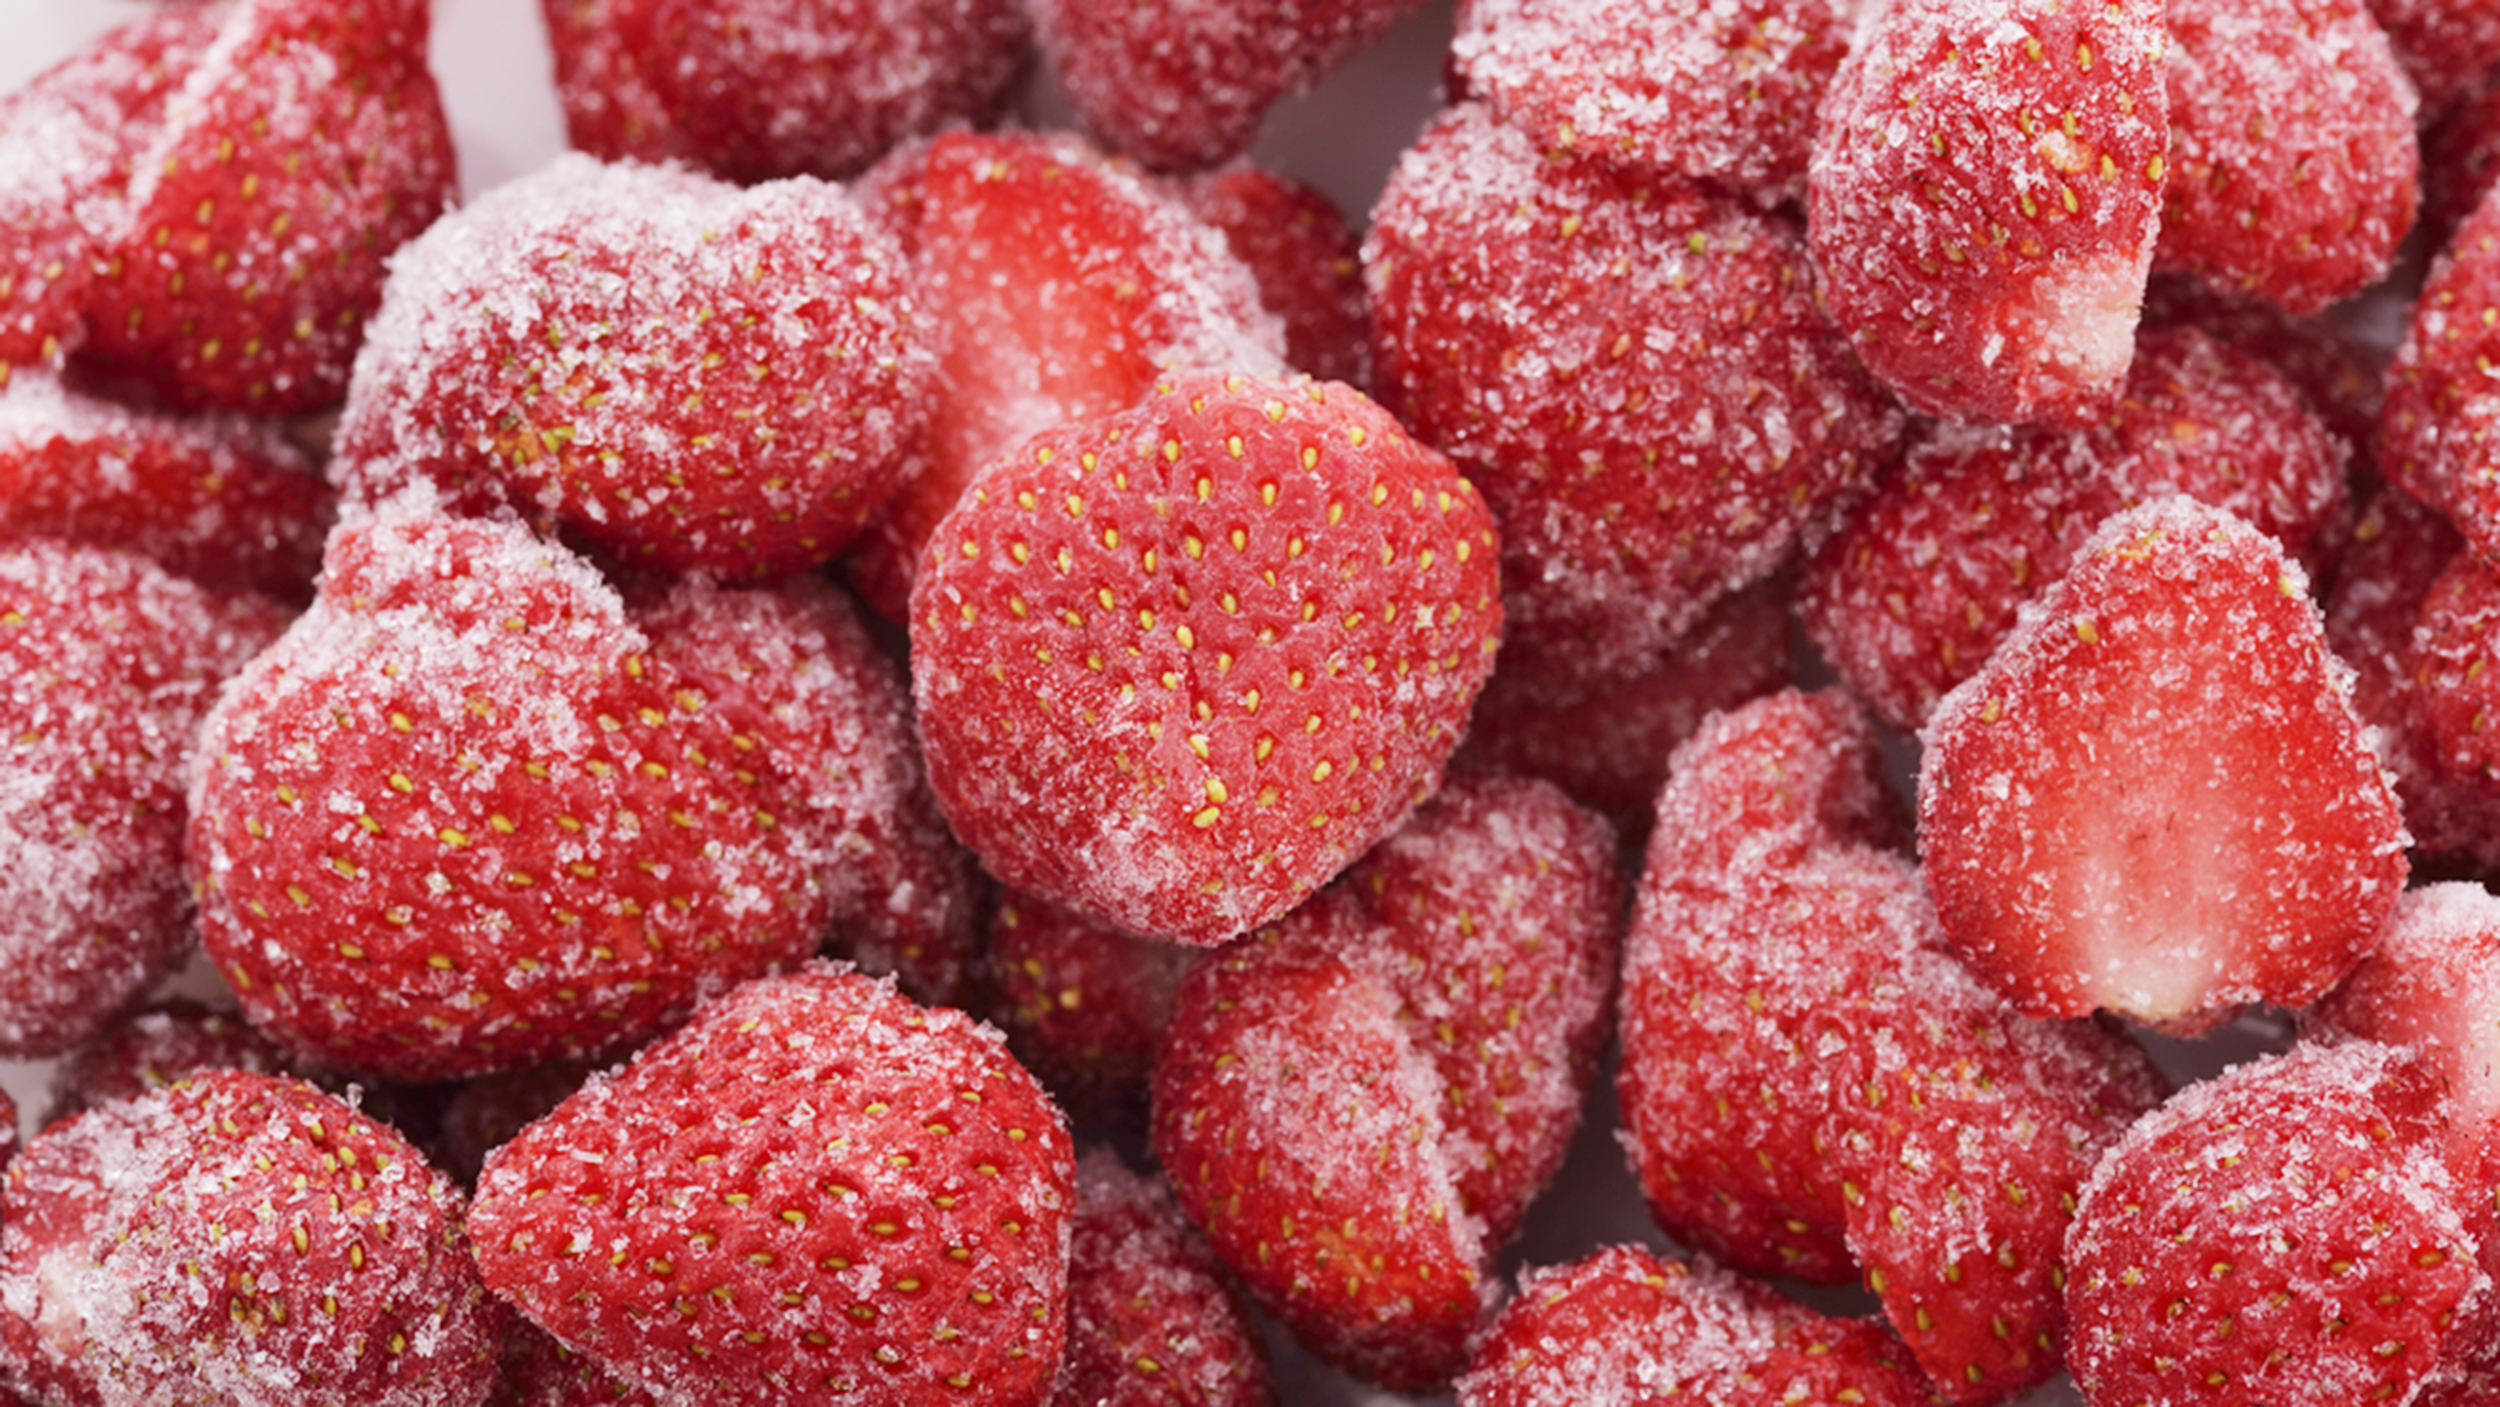 Are frozen foods safe to eat?